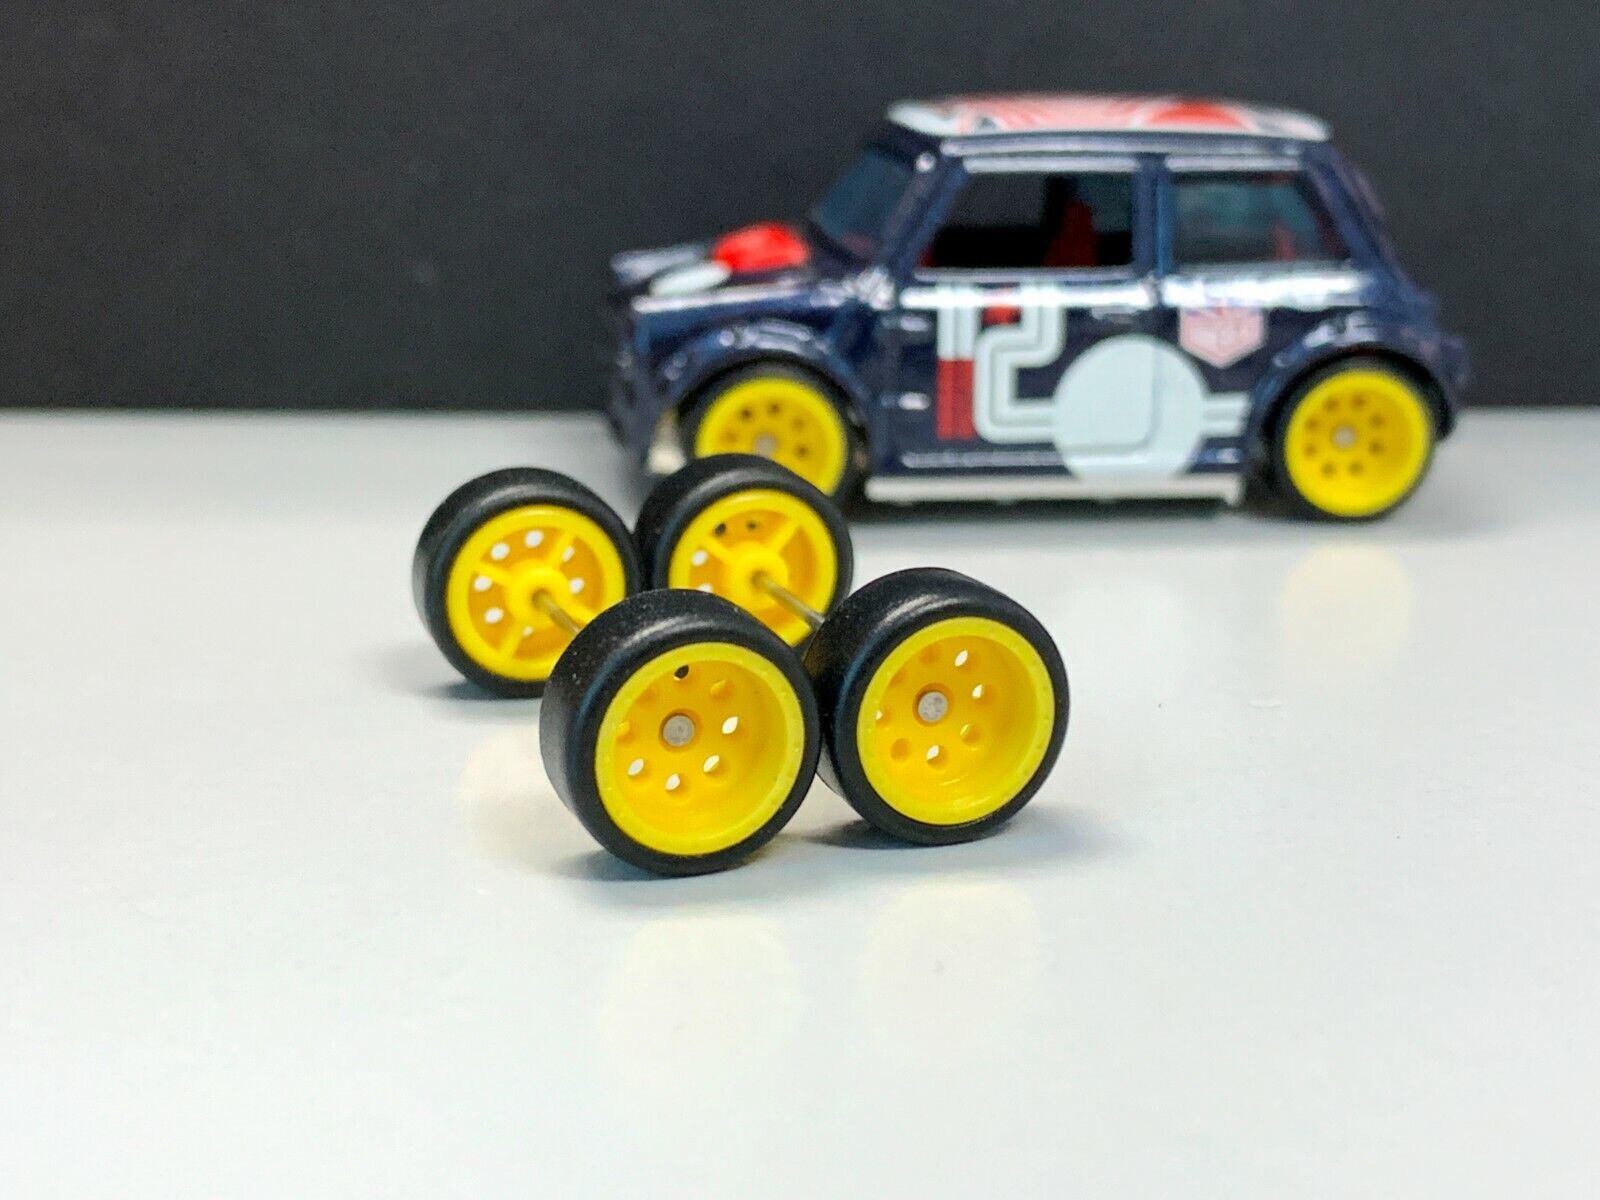 R027 Hotwheels 1 64 Set> RR8 Dot Yellow Rubber Long Selling and selling 10mm axle W Long-awaited